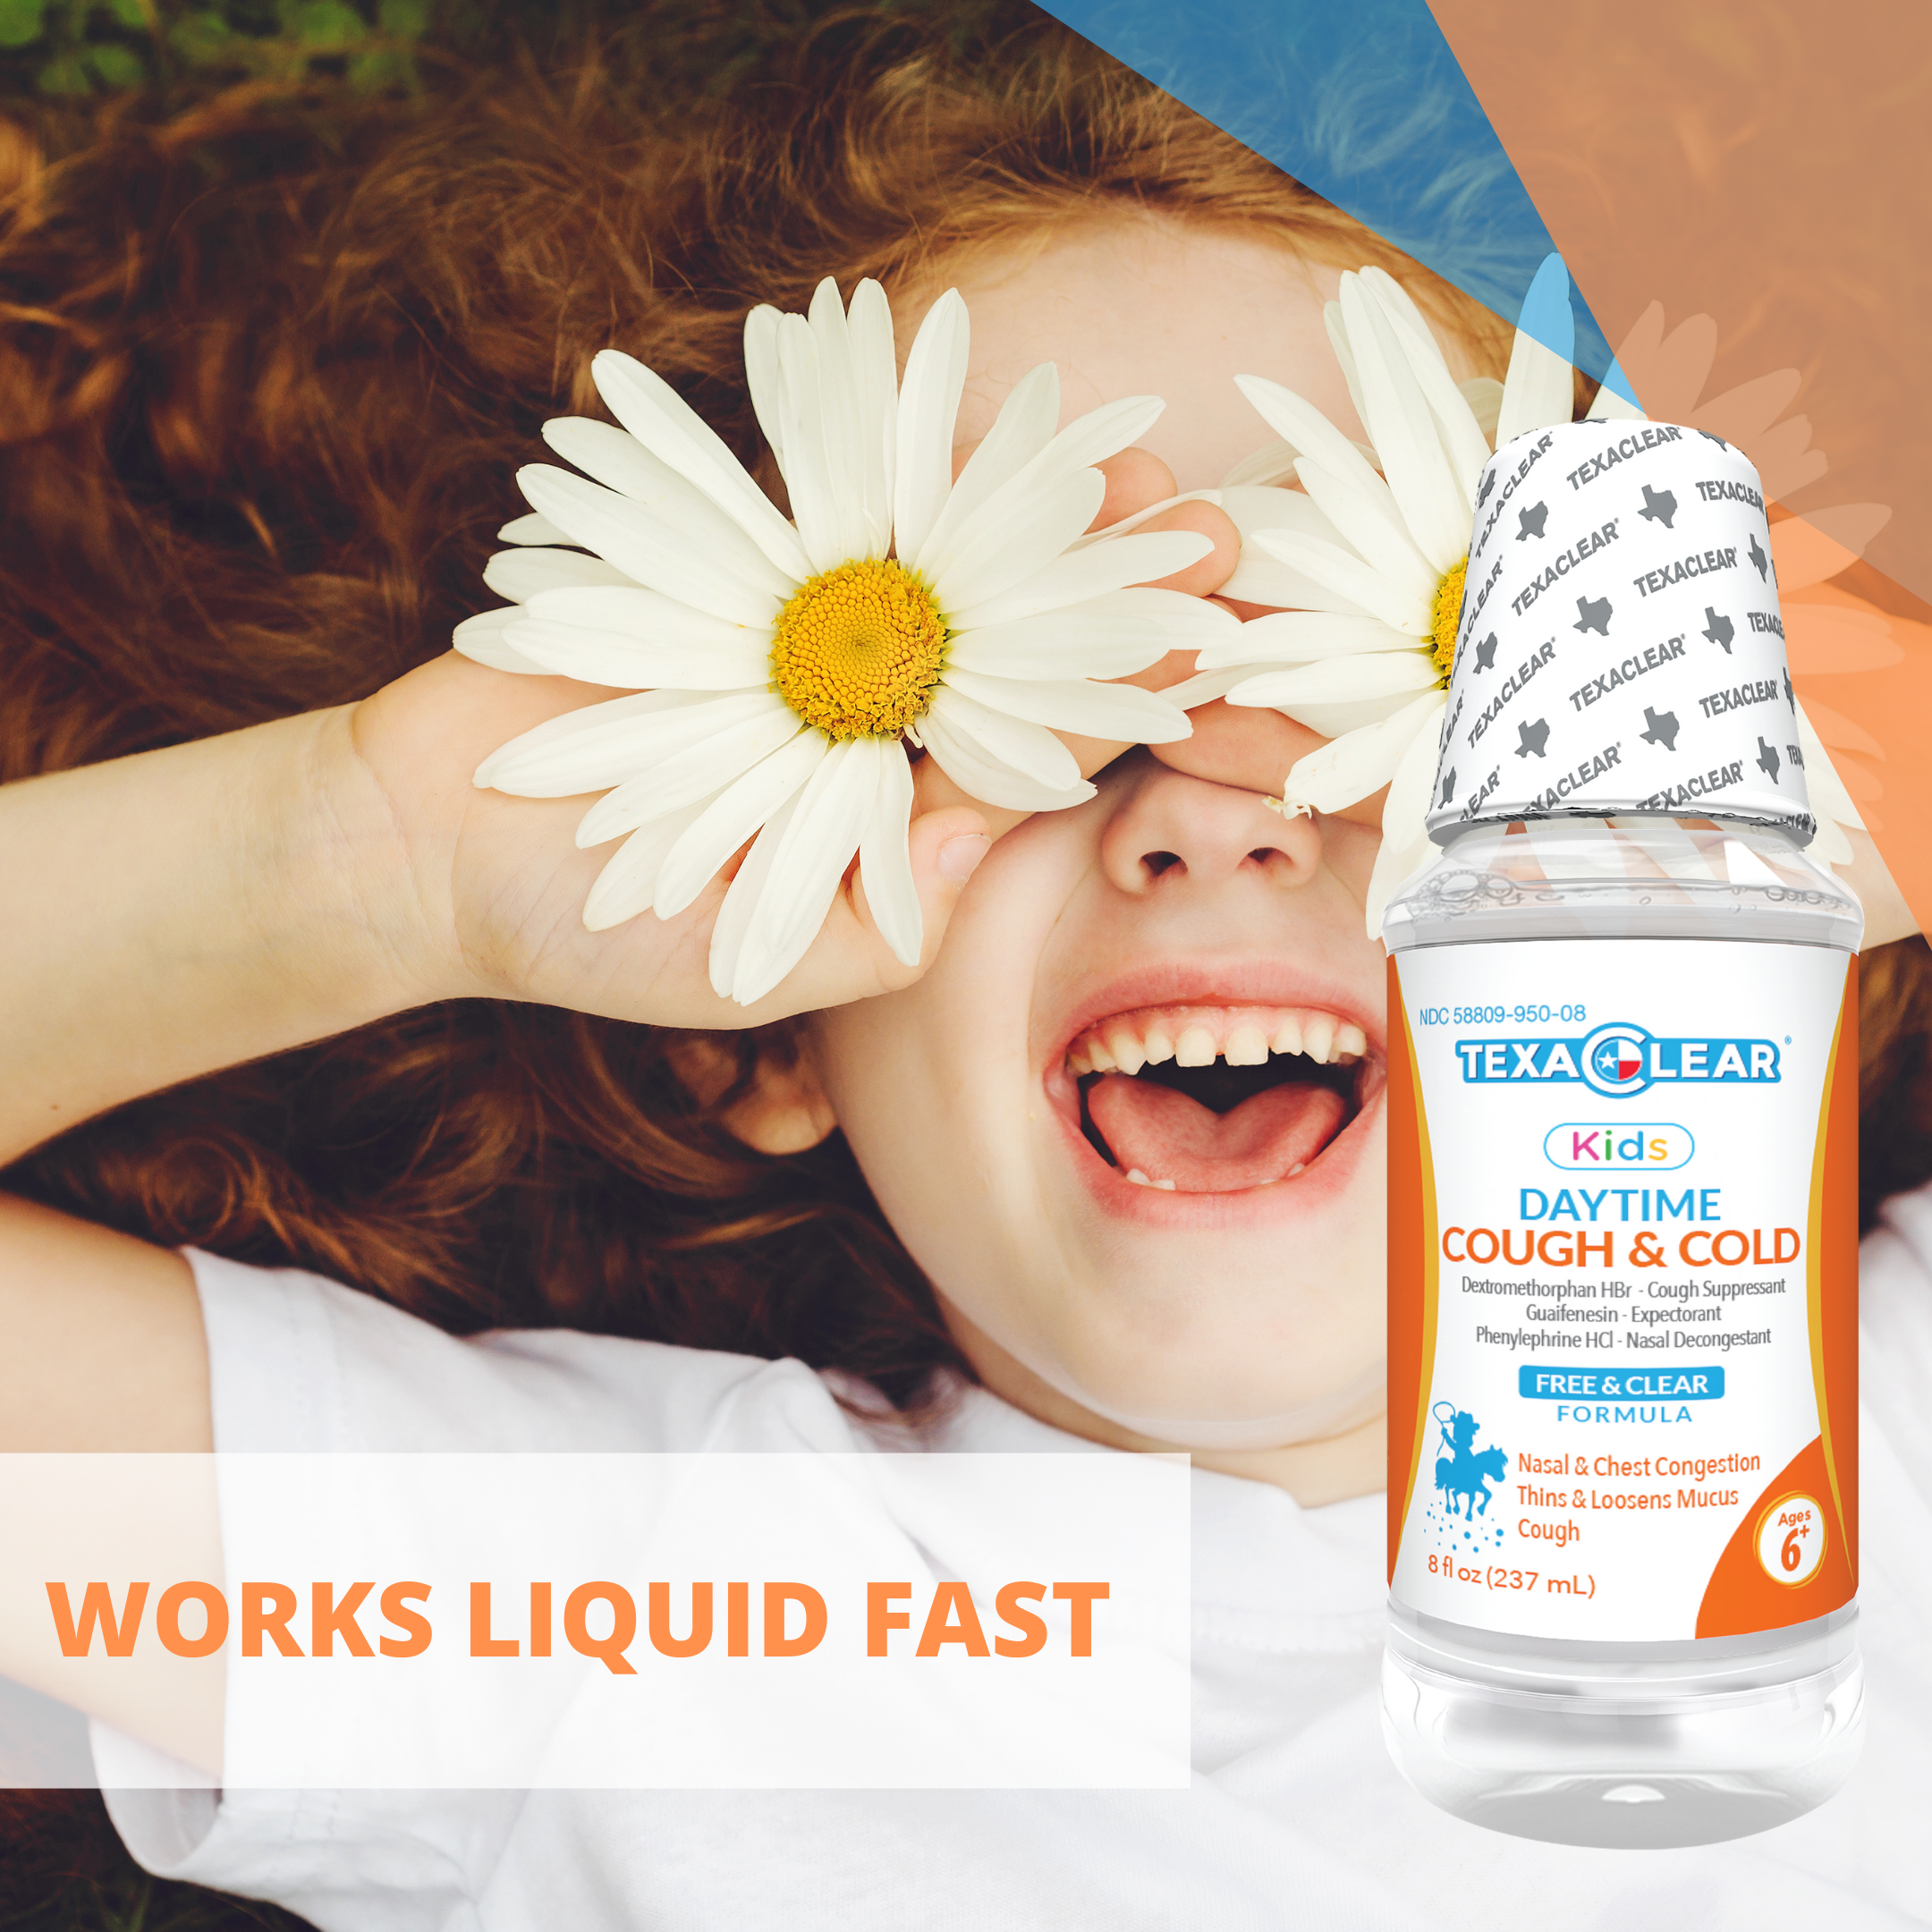 TexaClear® Kids Daytime Cough & Cold Relief